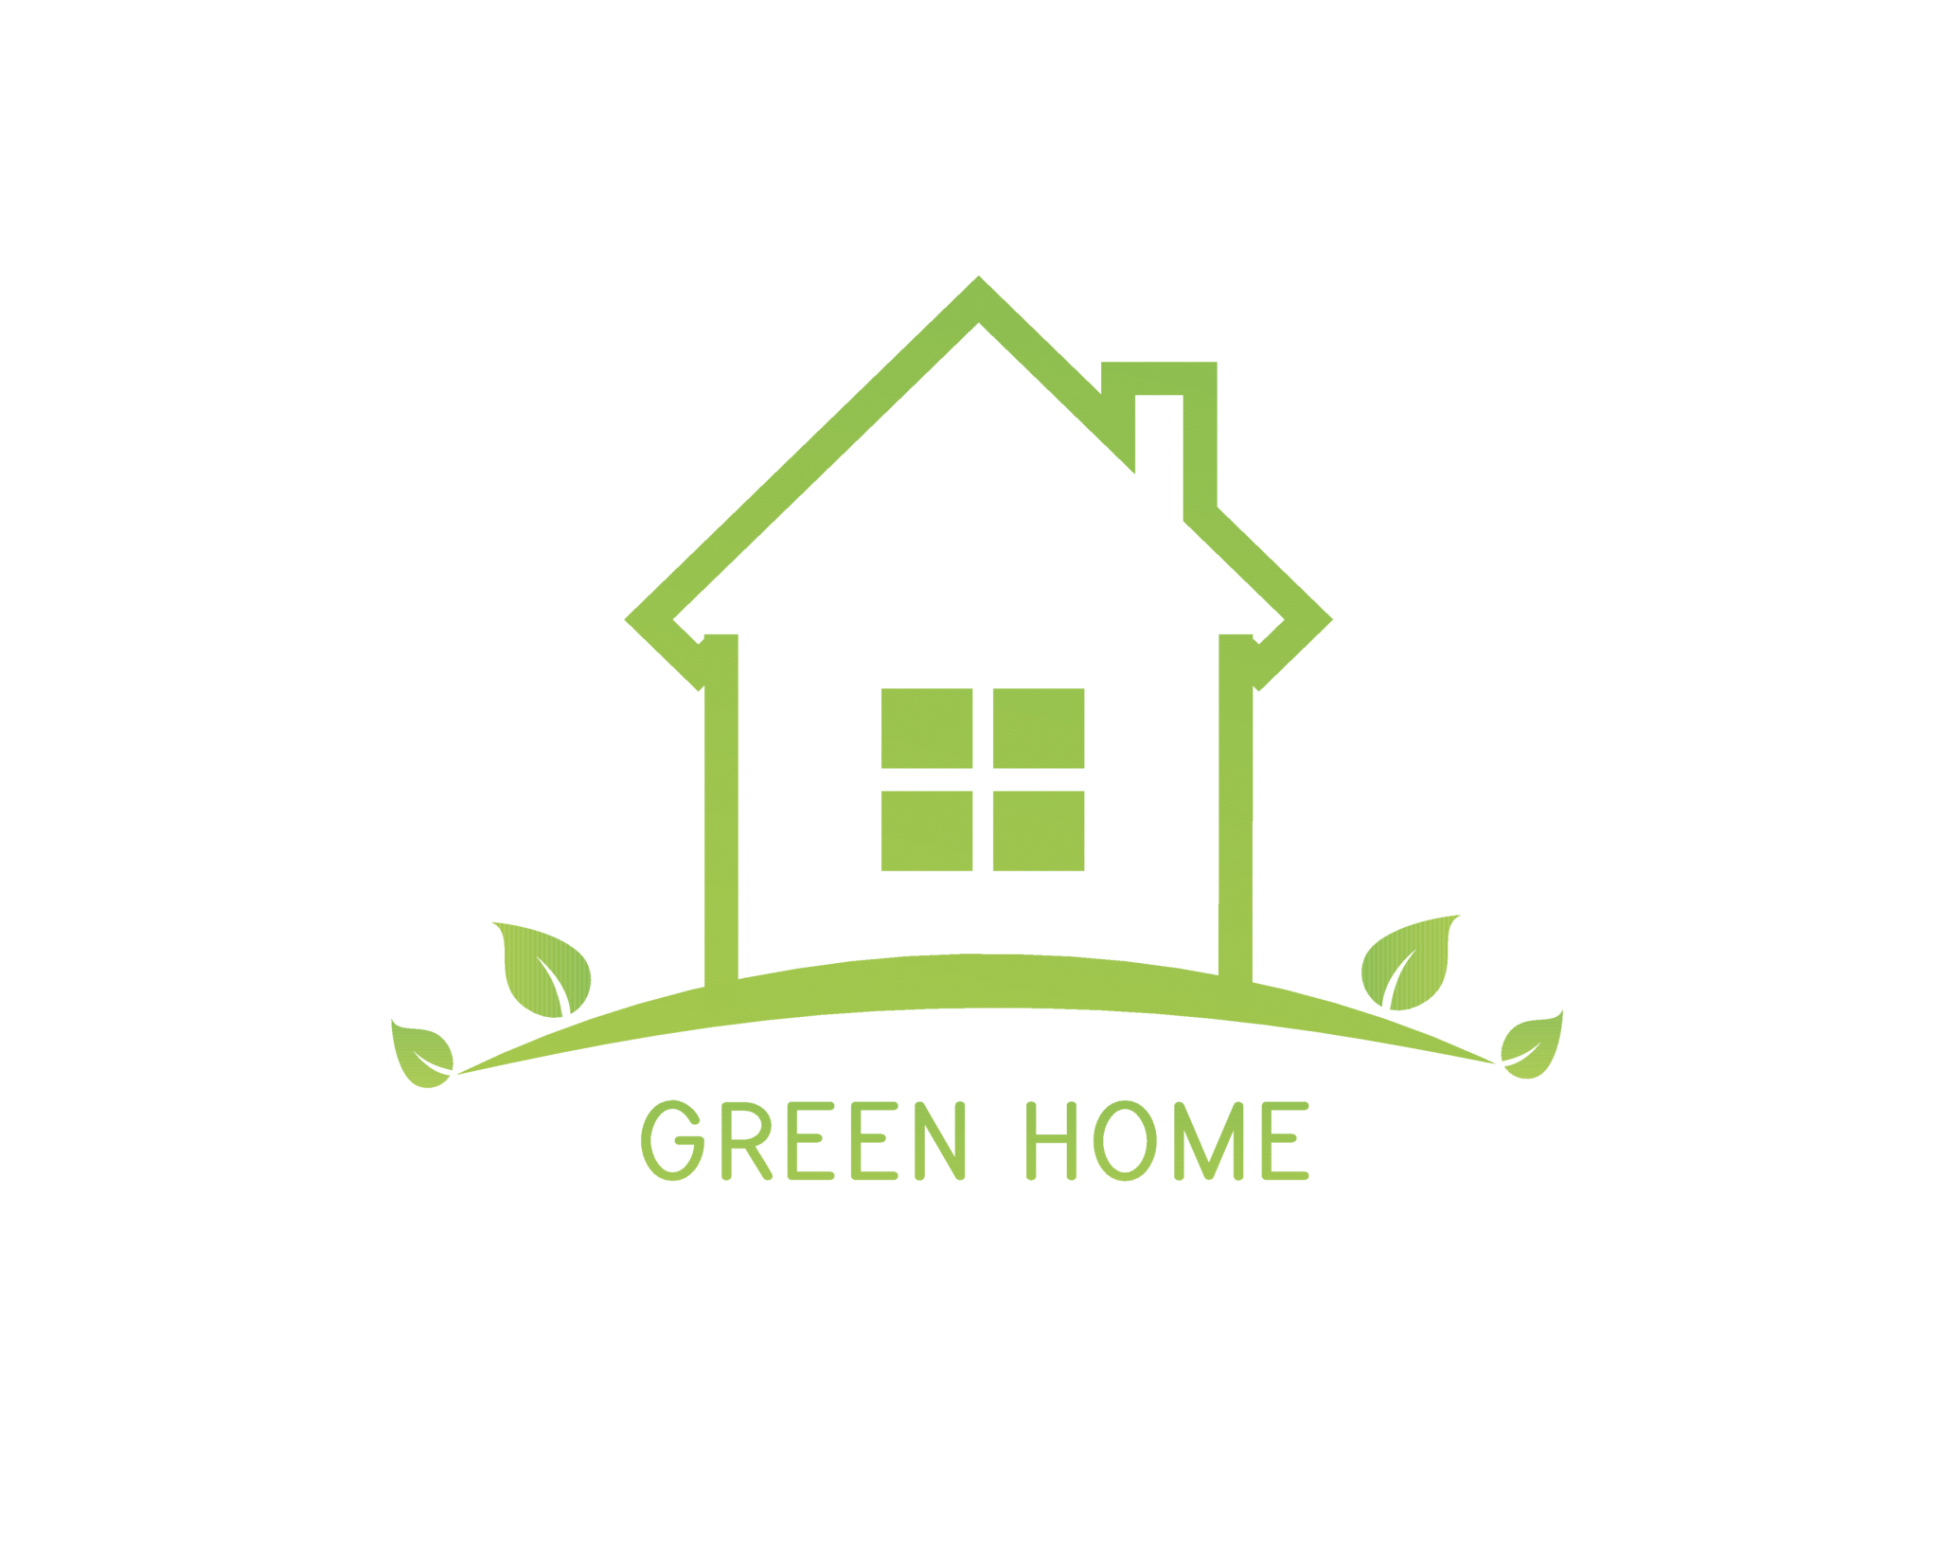 Green home design with leaves